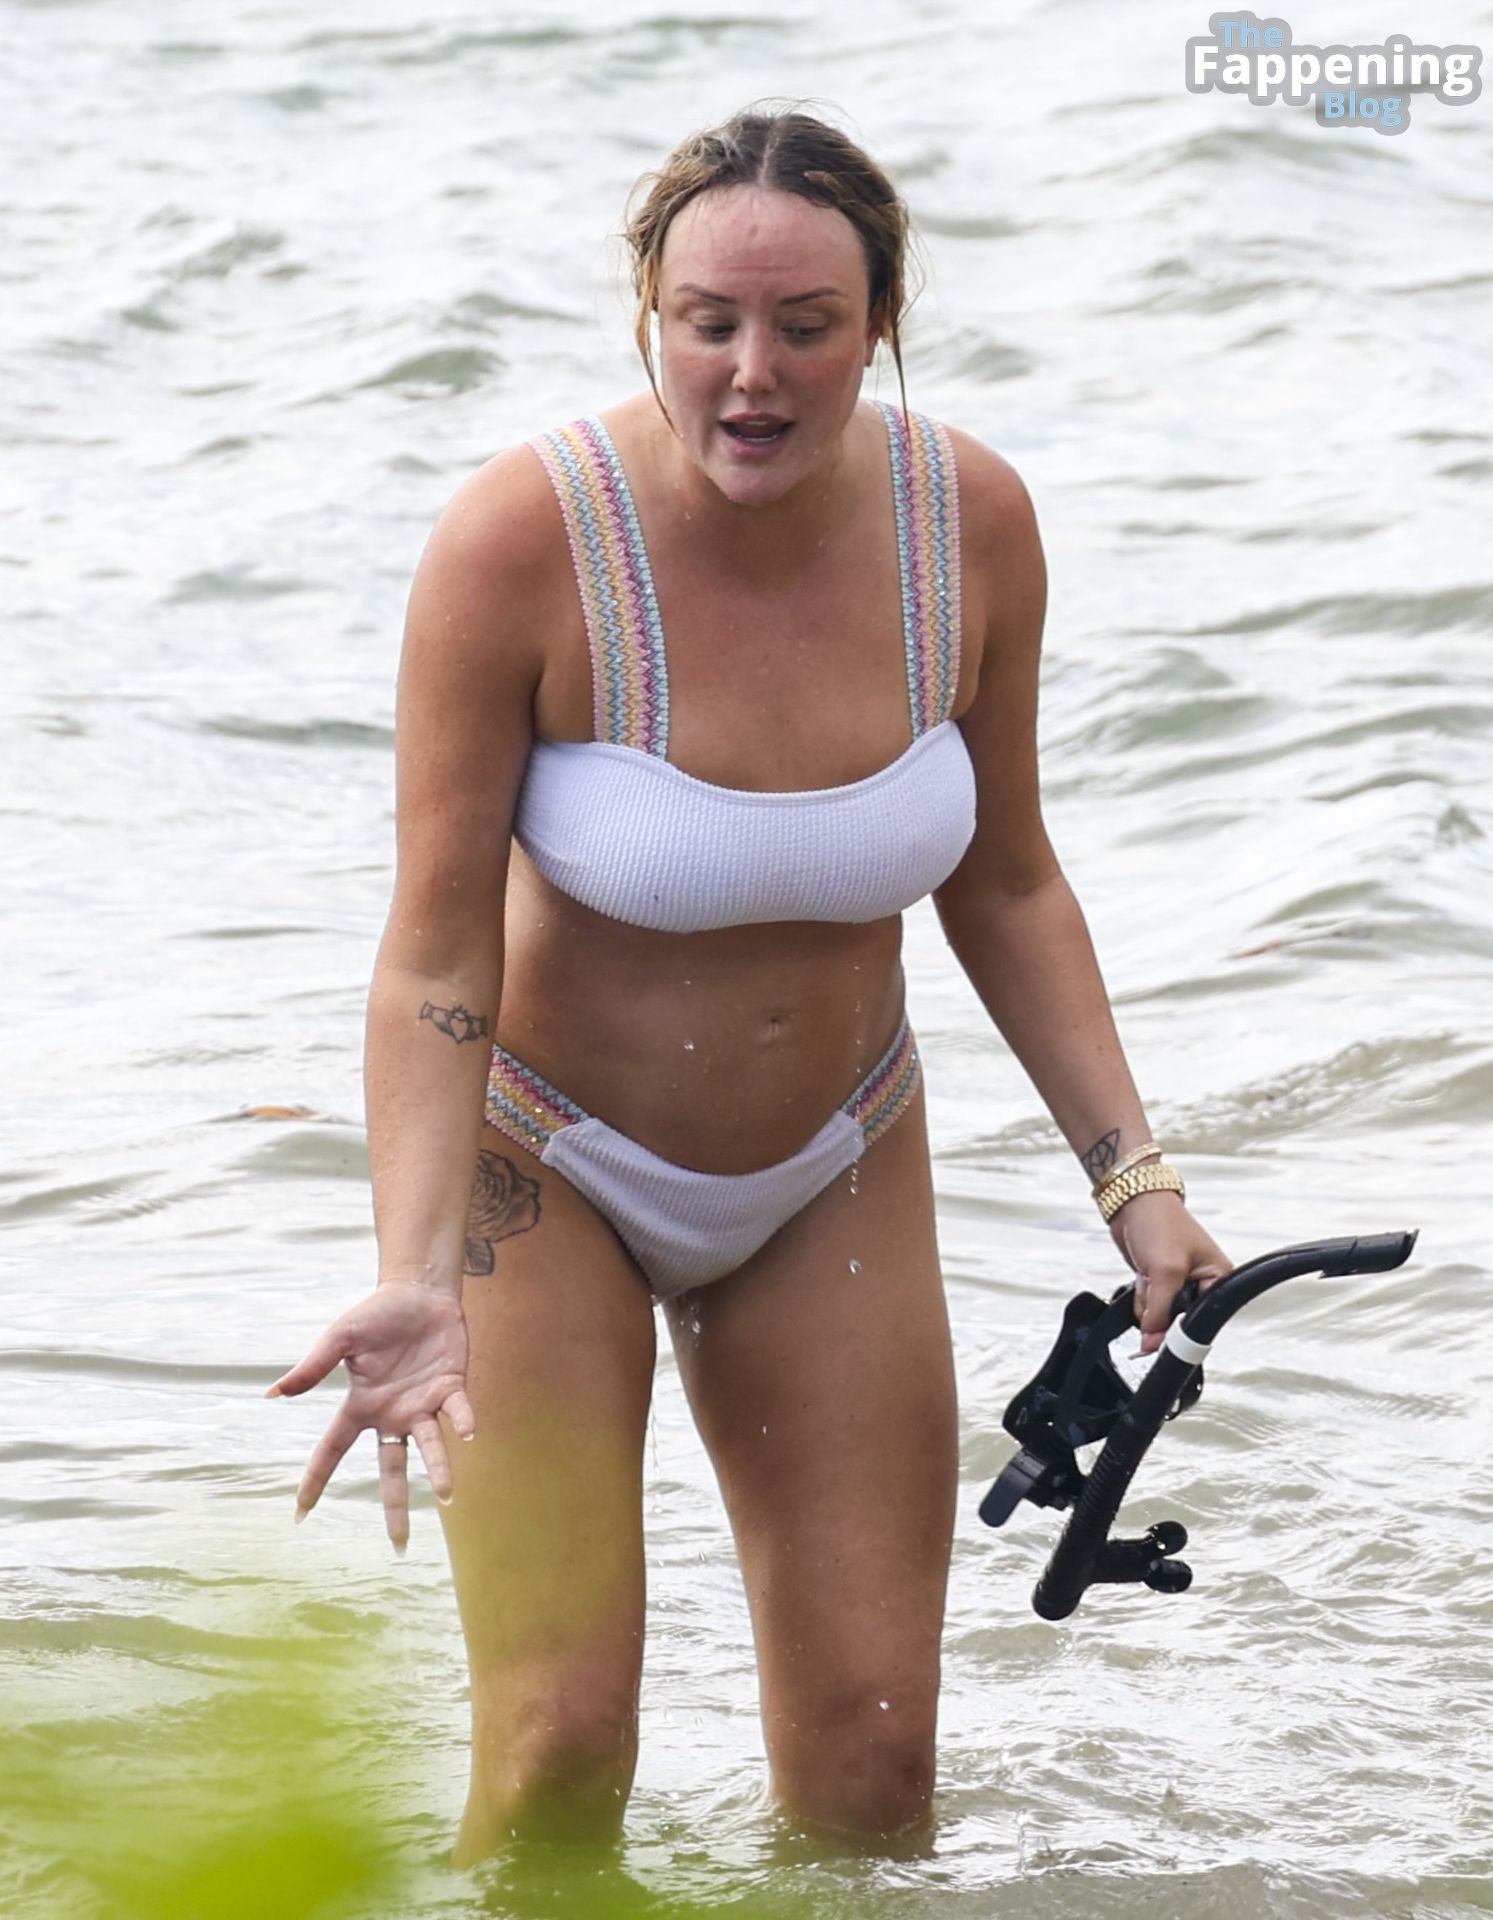 Charlotte-Crosby-Sexy-4-The-Fappening-Blog.jpg